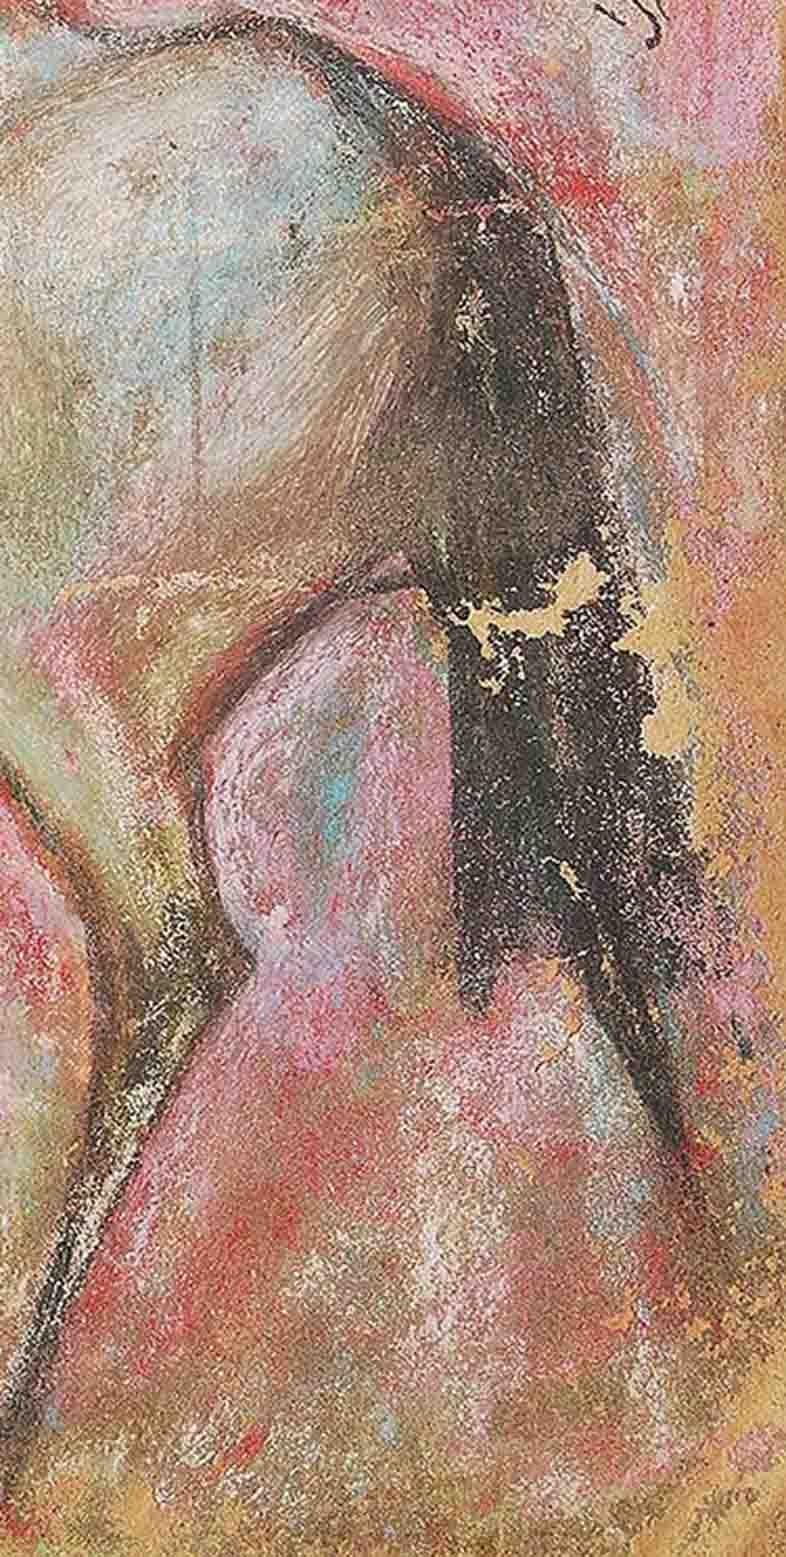 Horse II, Pastel on Sand Paper, Red, Pink, Brown, Blue by Sunil Das 